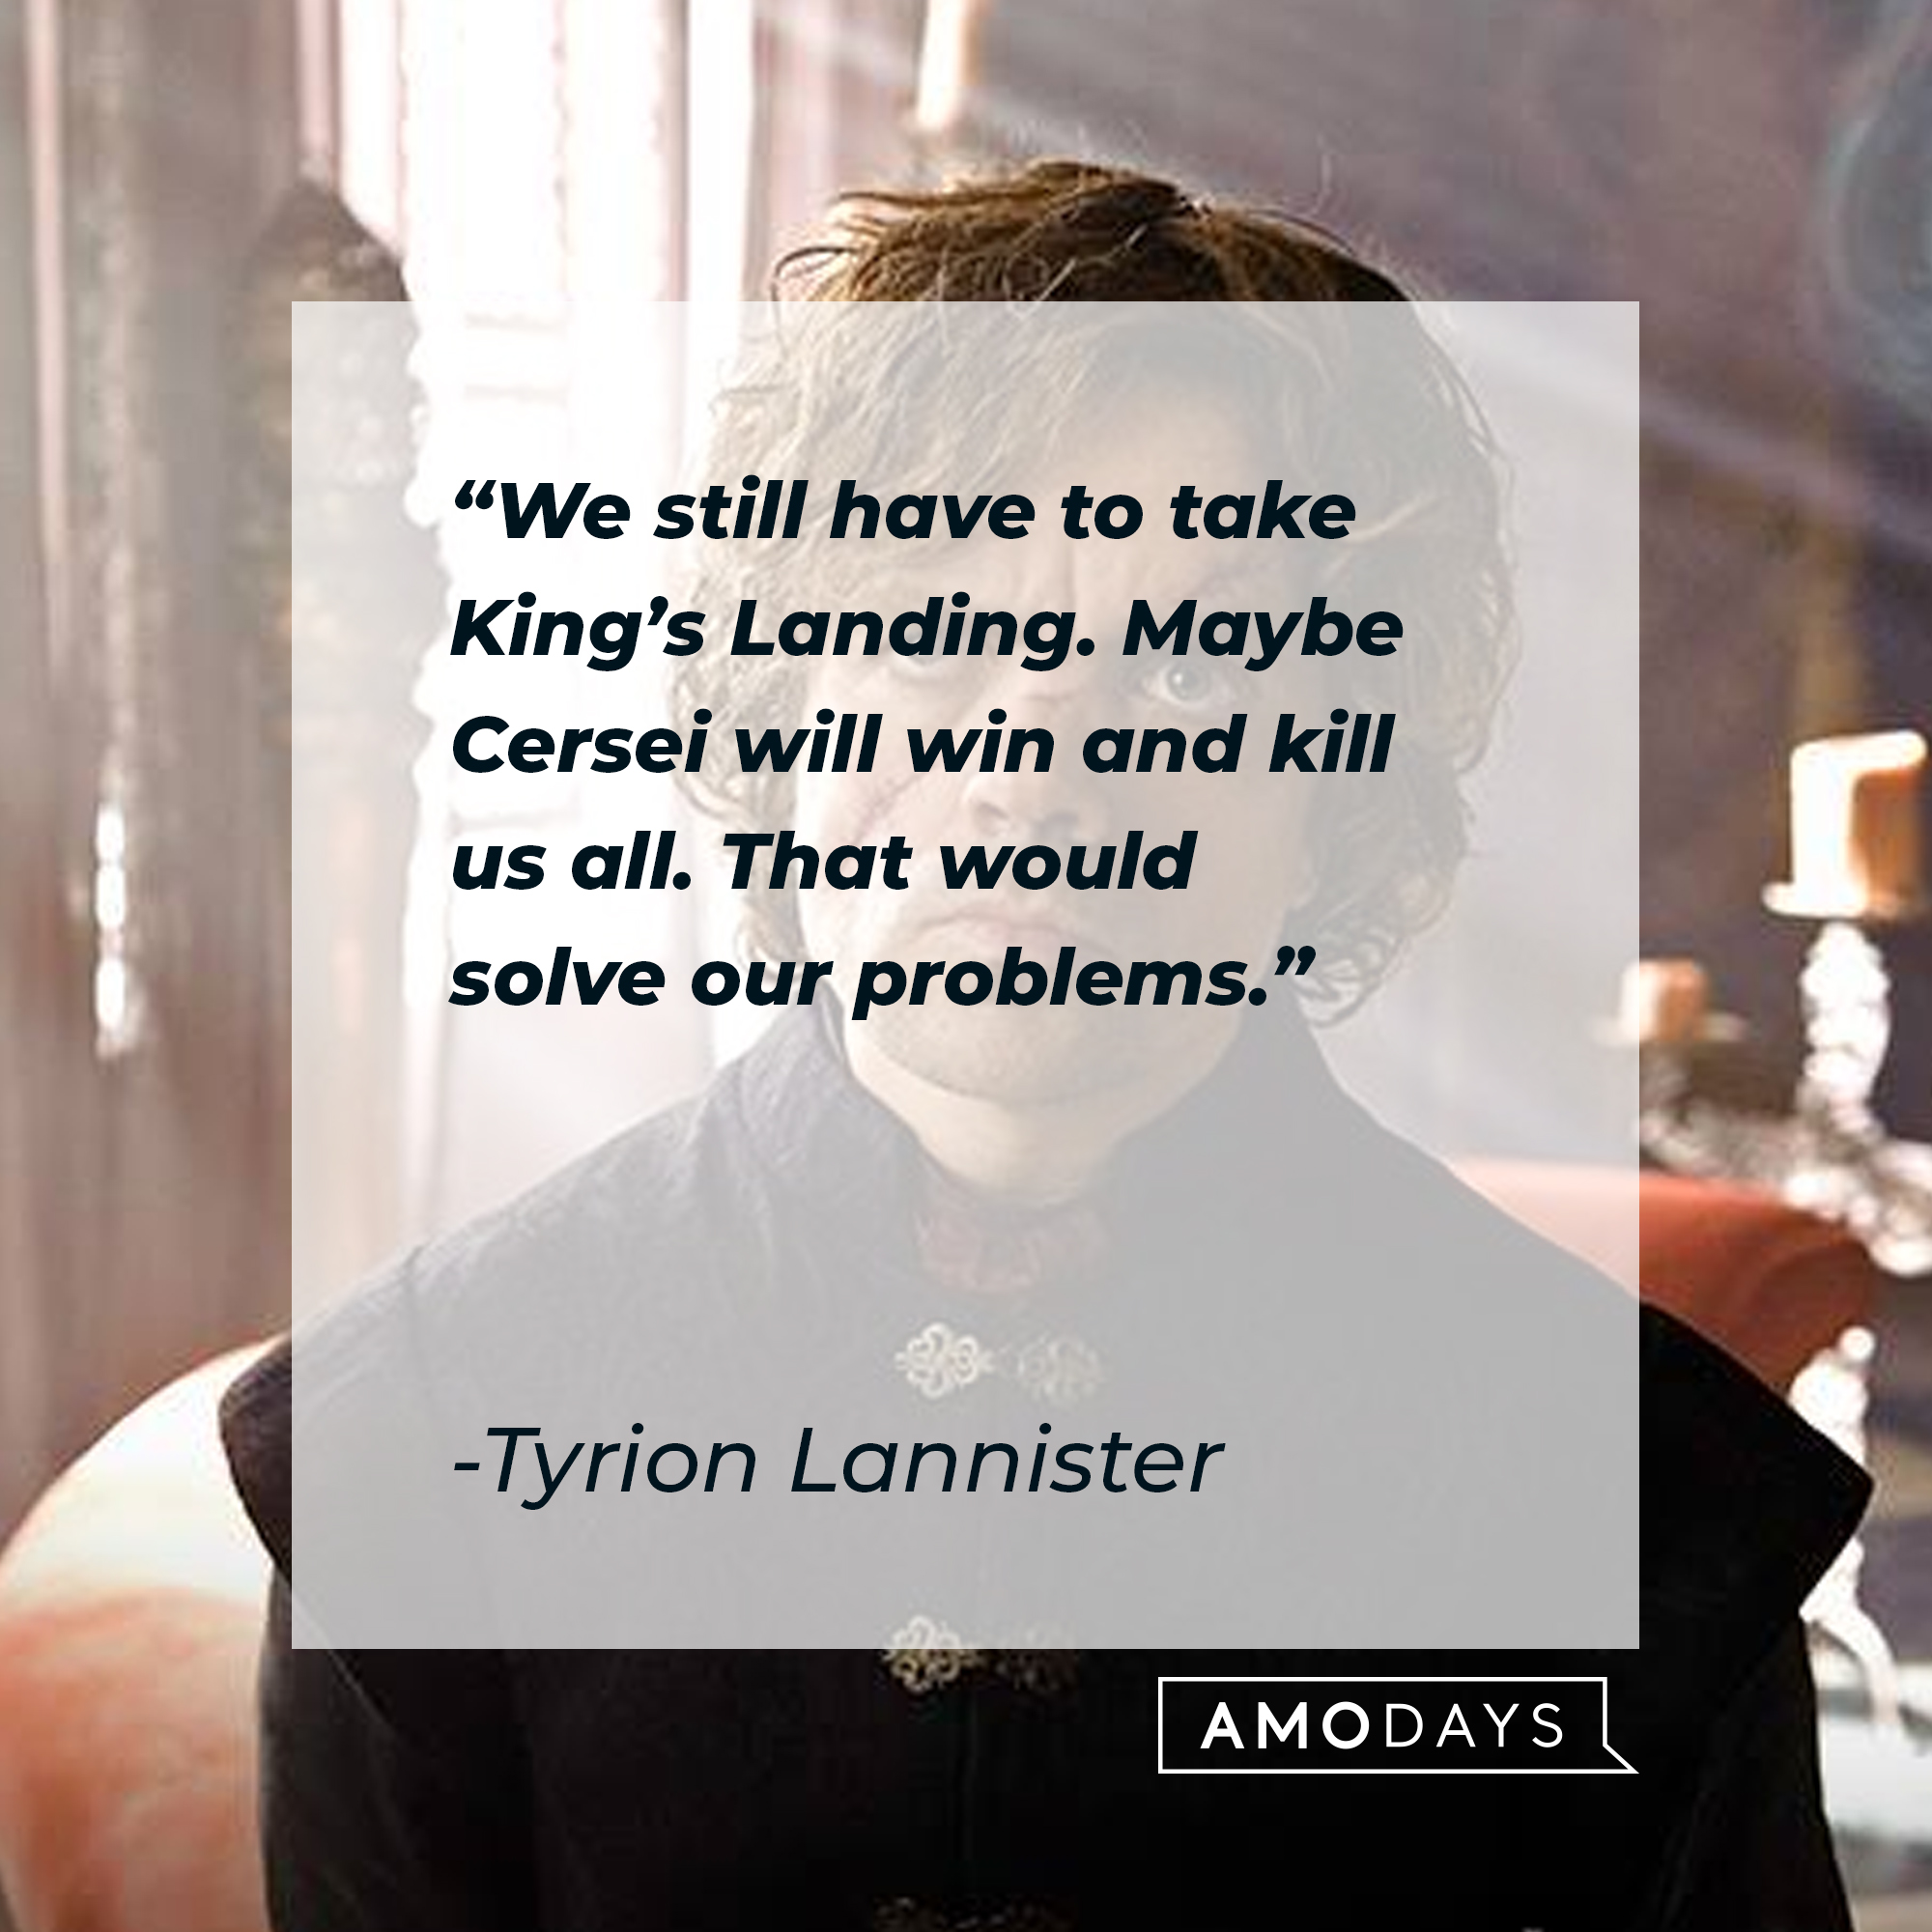 Tyrion Lannister's quote: “We still have to take King’s Landing. Maybe Cersei will win and kill us all. That would solve our problems.” | Source: facebook.com/GameOfThrones